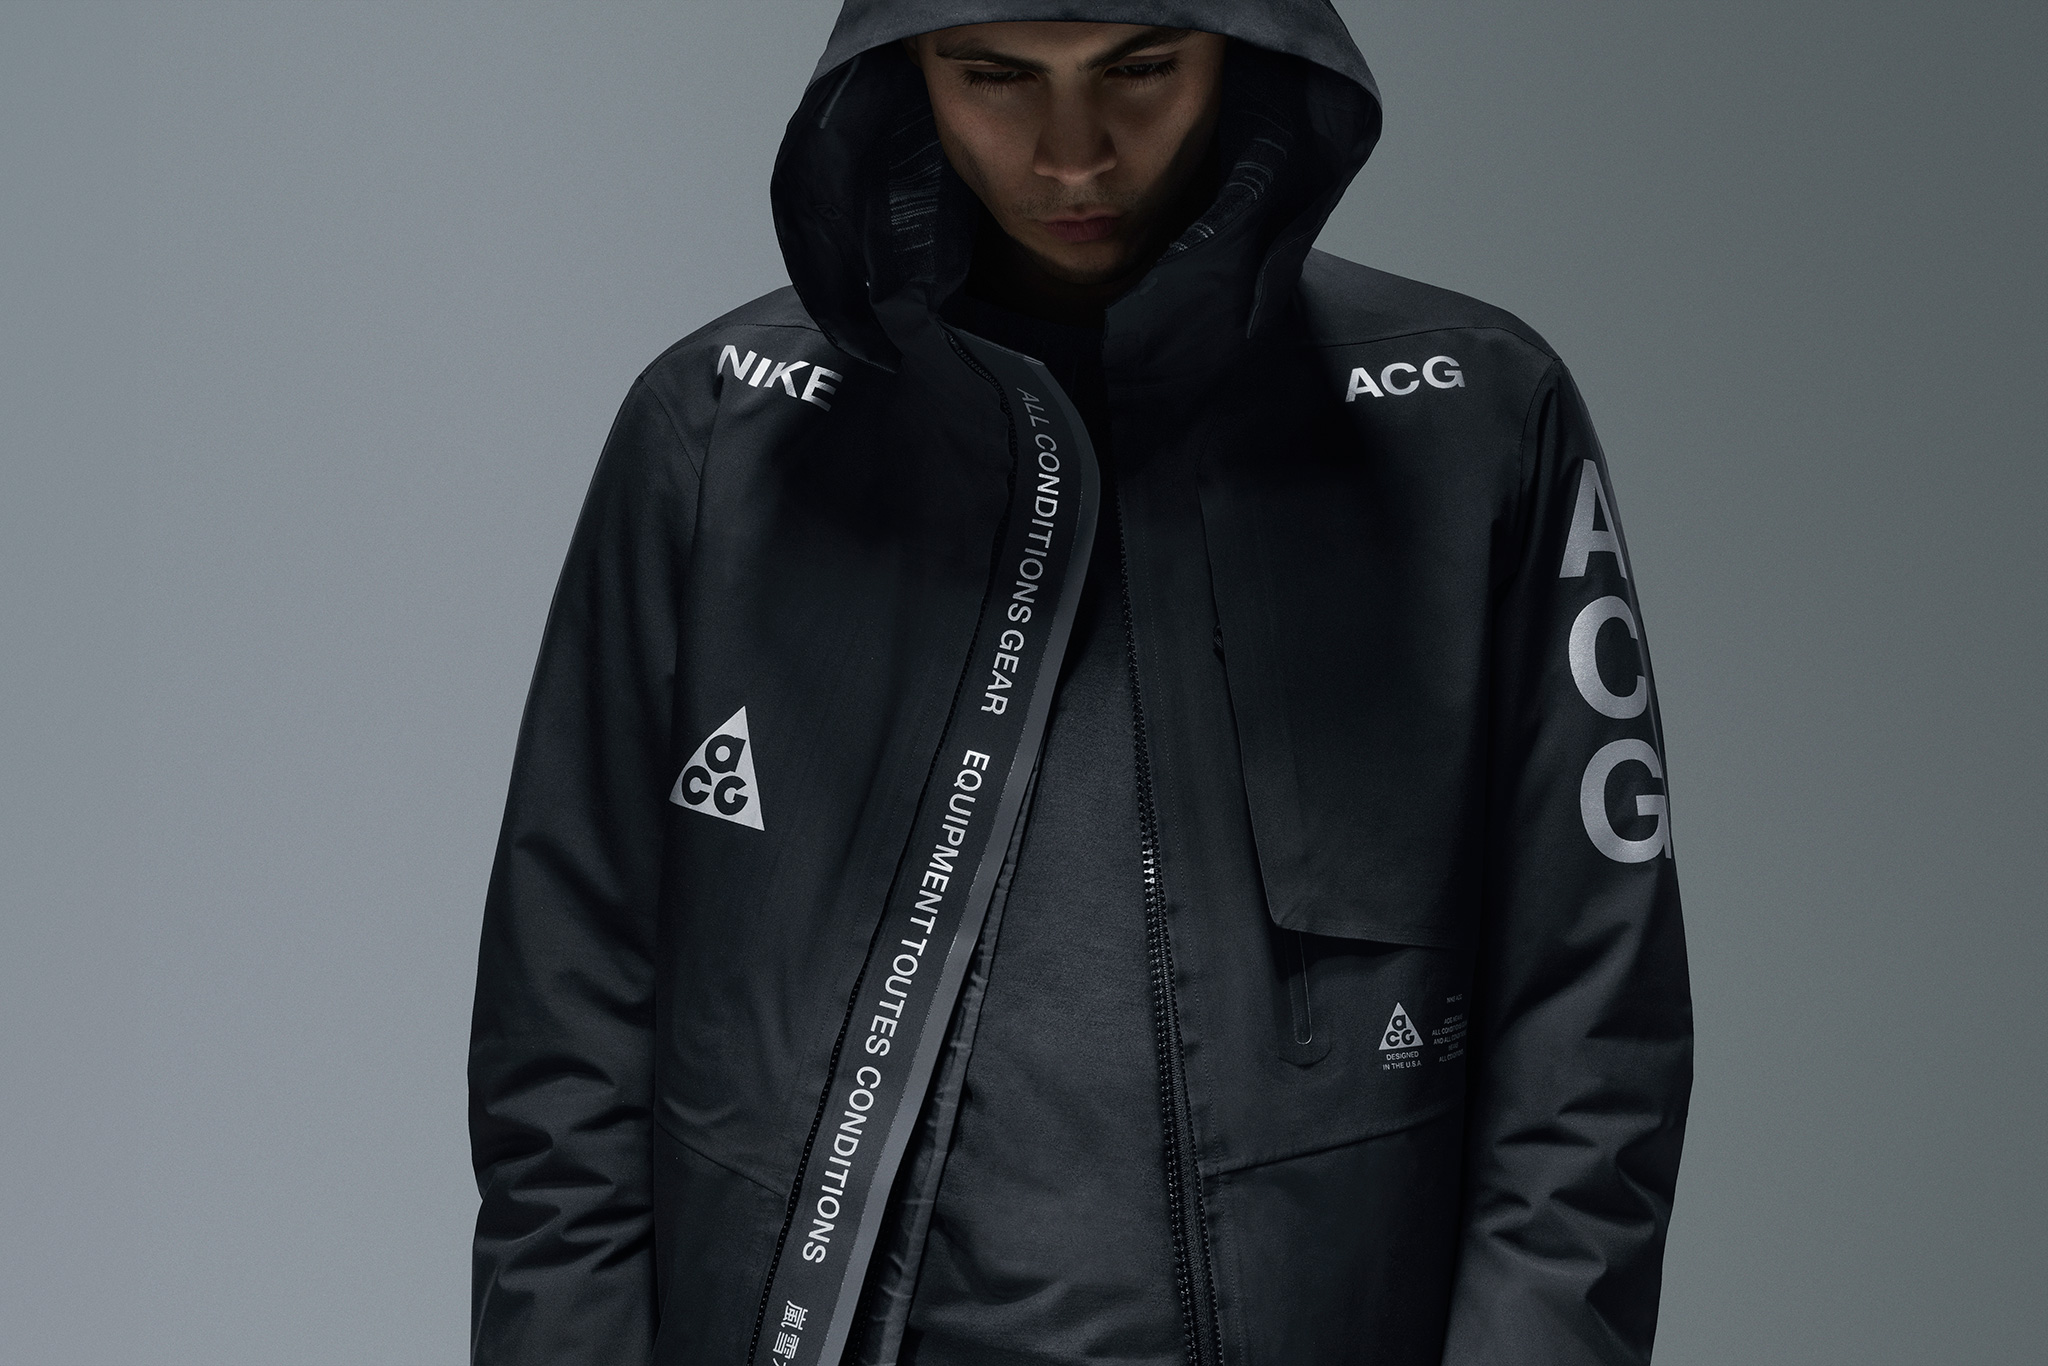 NikeLab Presents a New Direction for ACG, Bringing Outdoor Gear to the